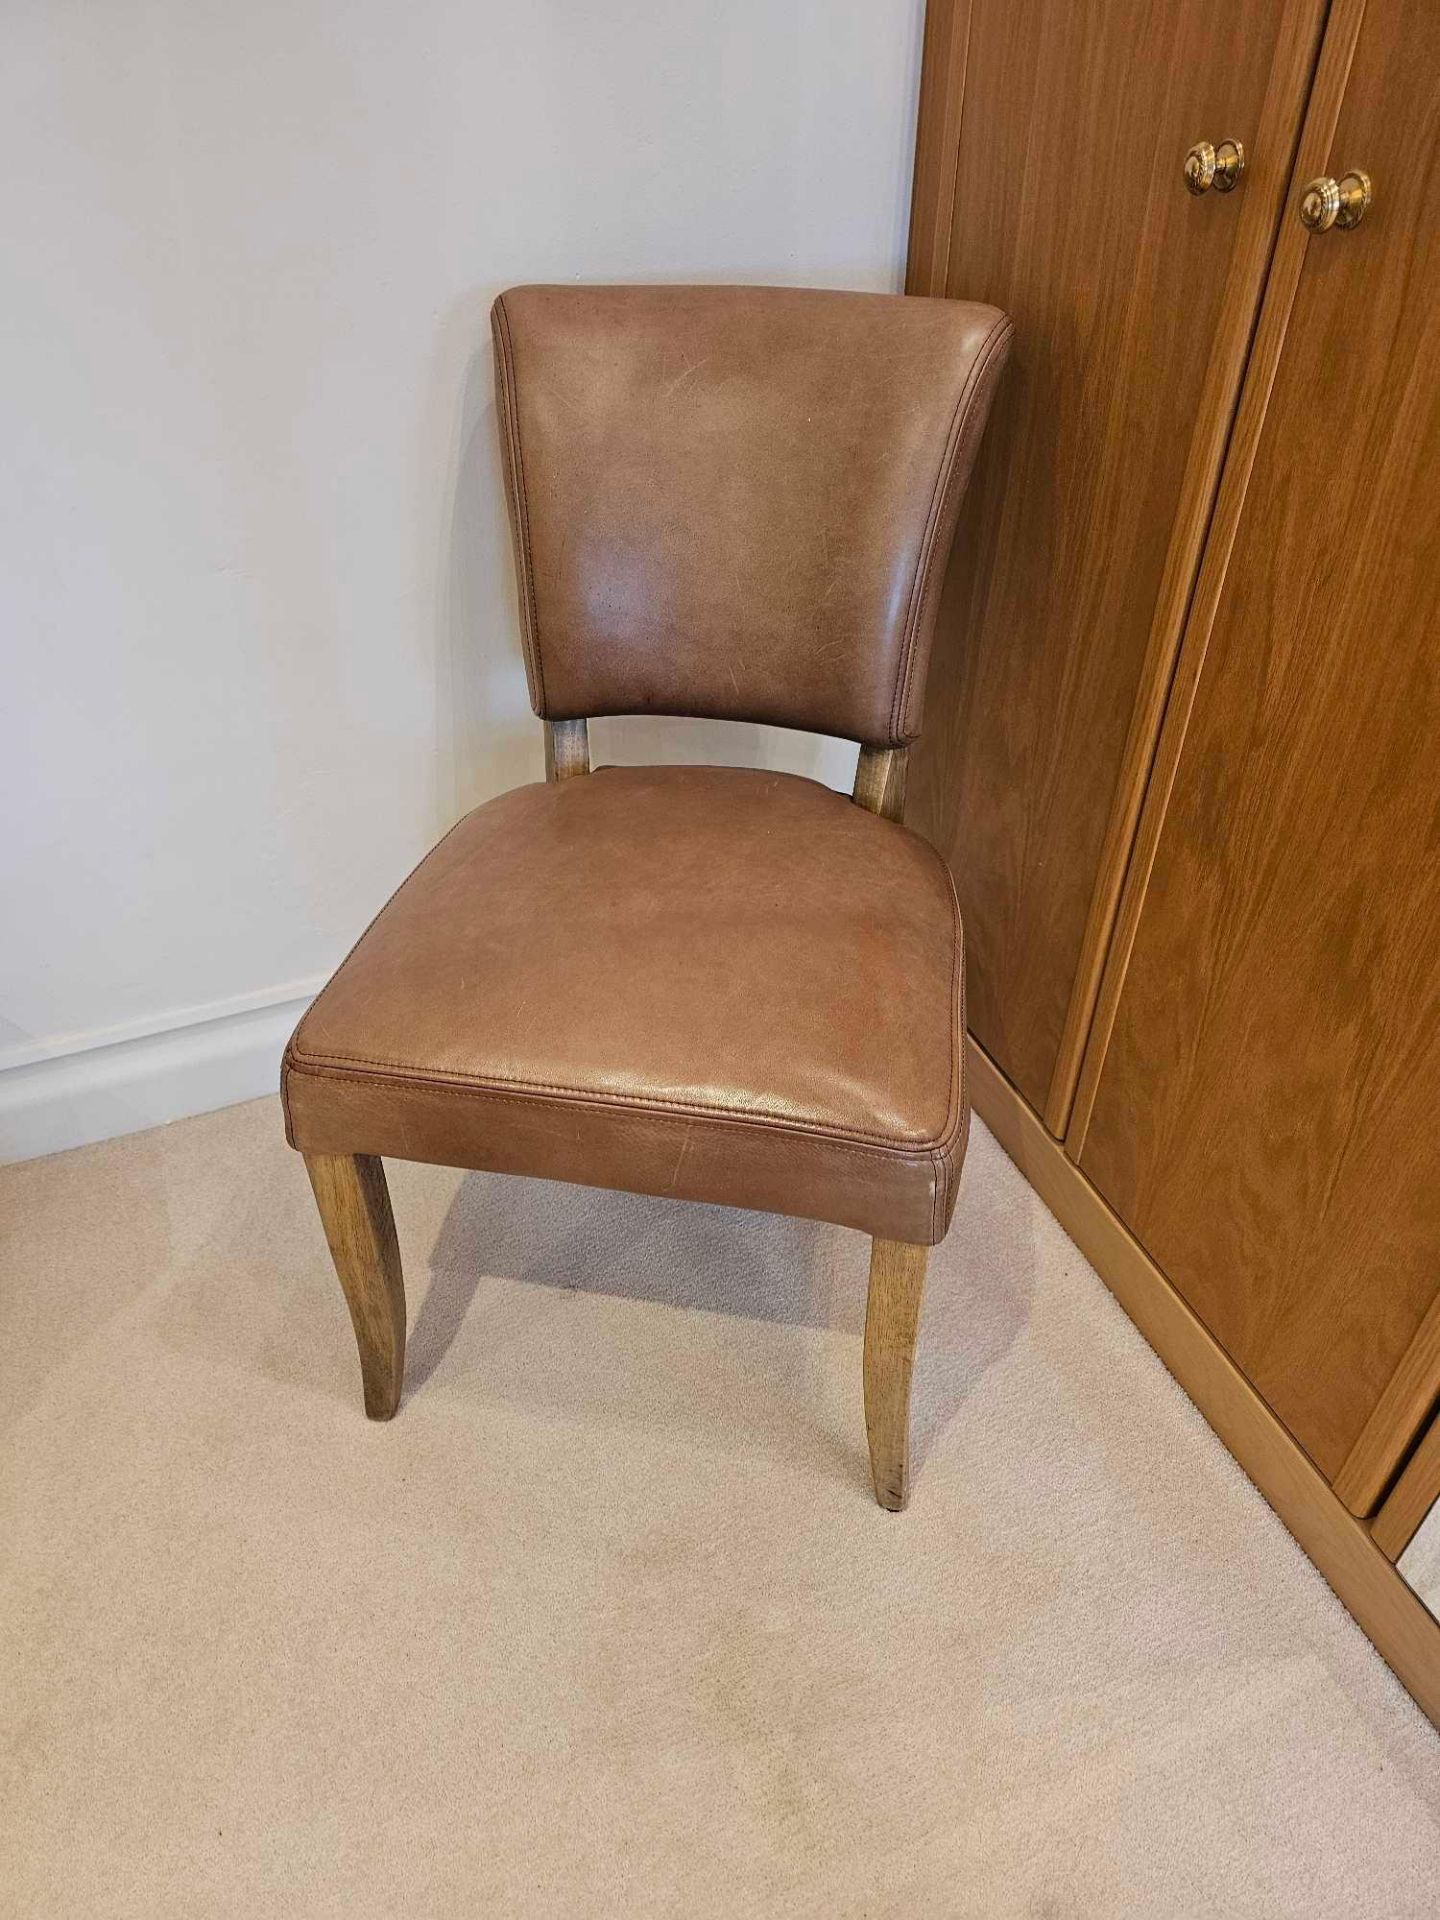 Timothy Oulton Mimi Brown Leather Studded Side Chair With Weathered Oak Legs Seat Height: 51cm - Image 3 of 3